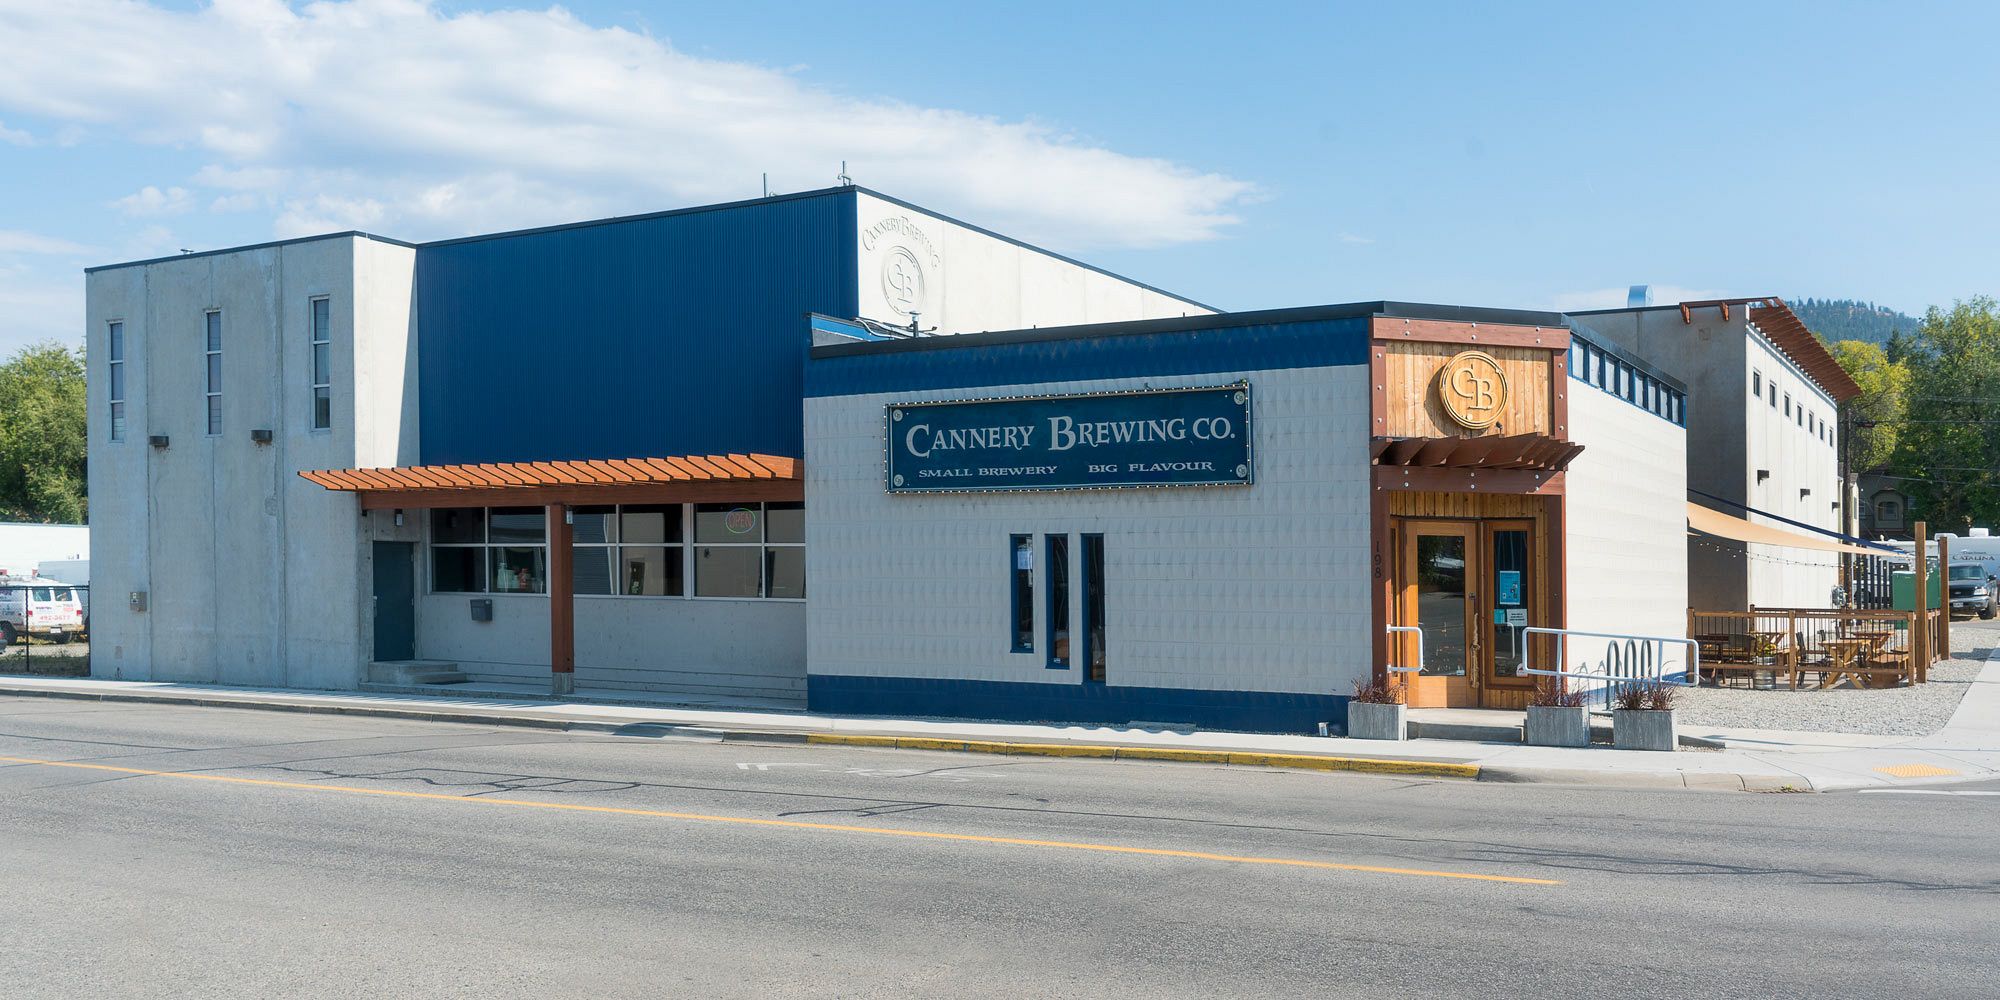 Cannery Brewing